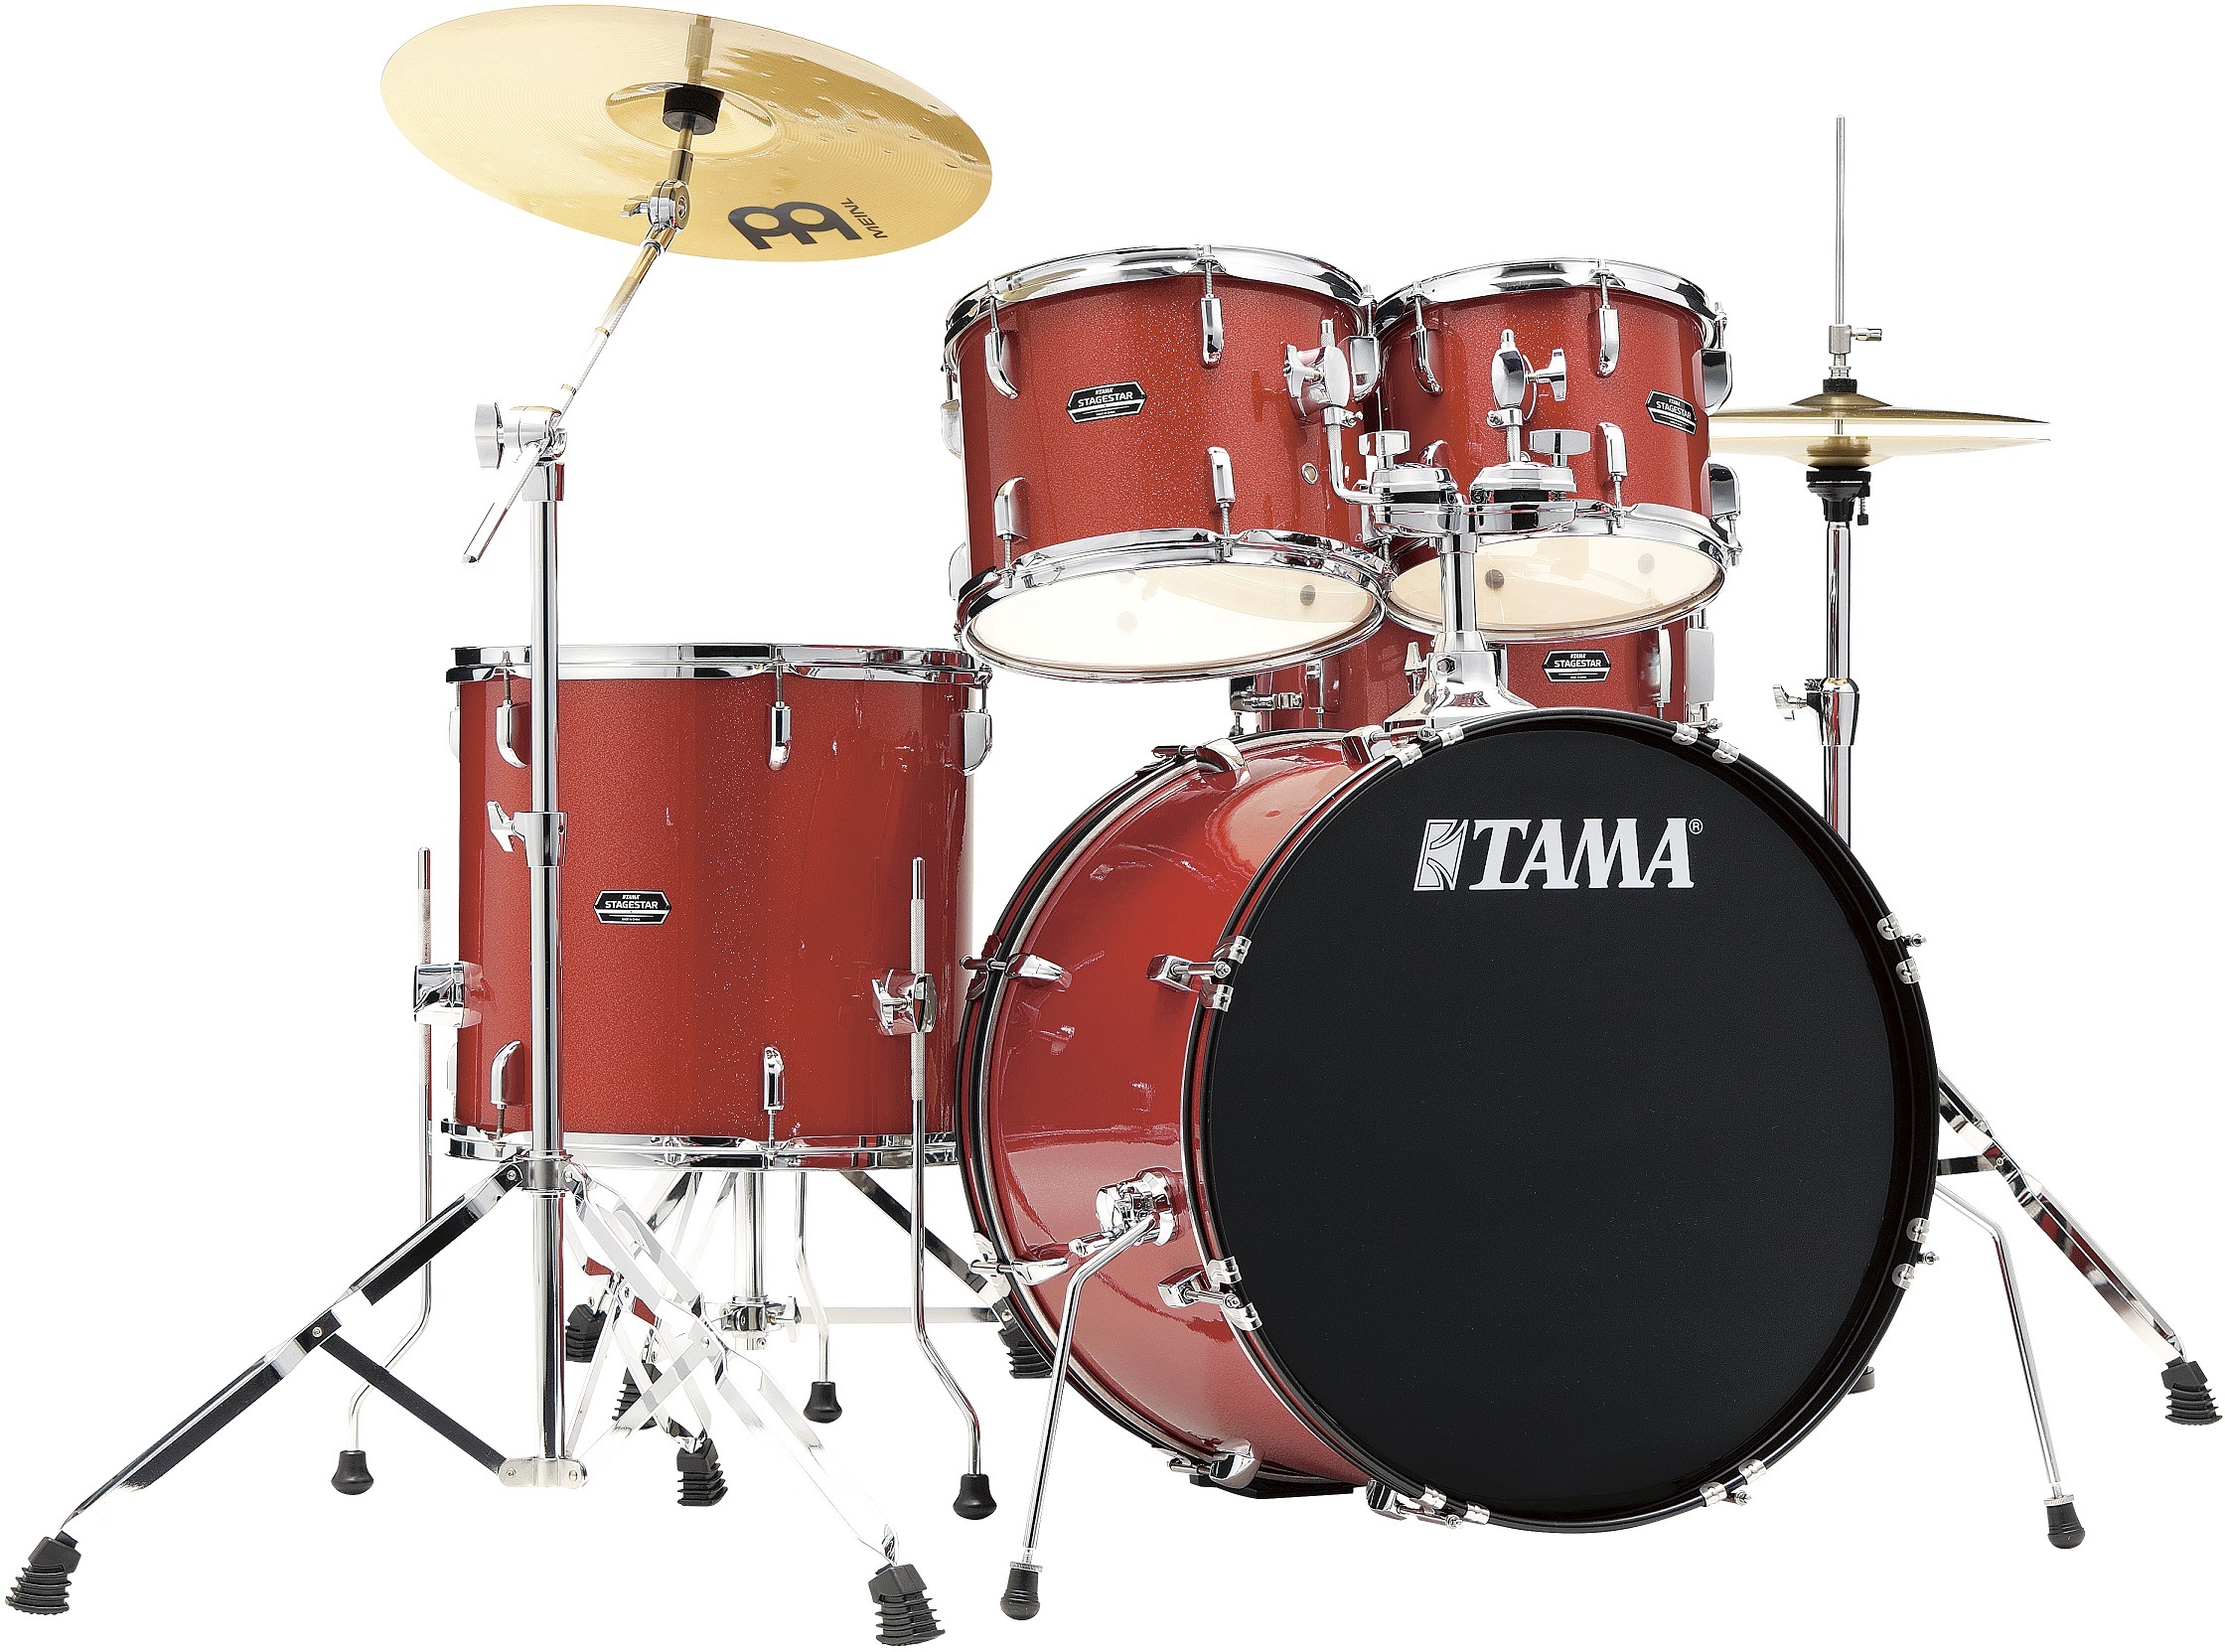 Tama Stagestar St52h5 22 Poplar Kit - Candy Red Sparkle - Strage drum-kit - Main picture